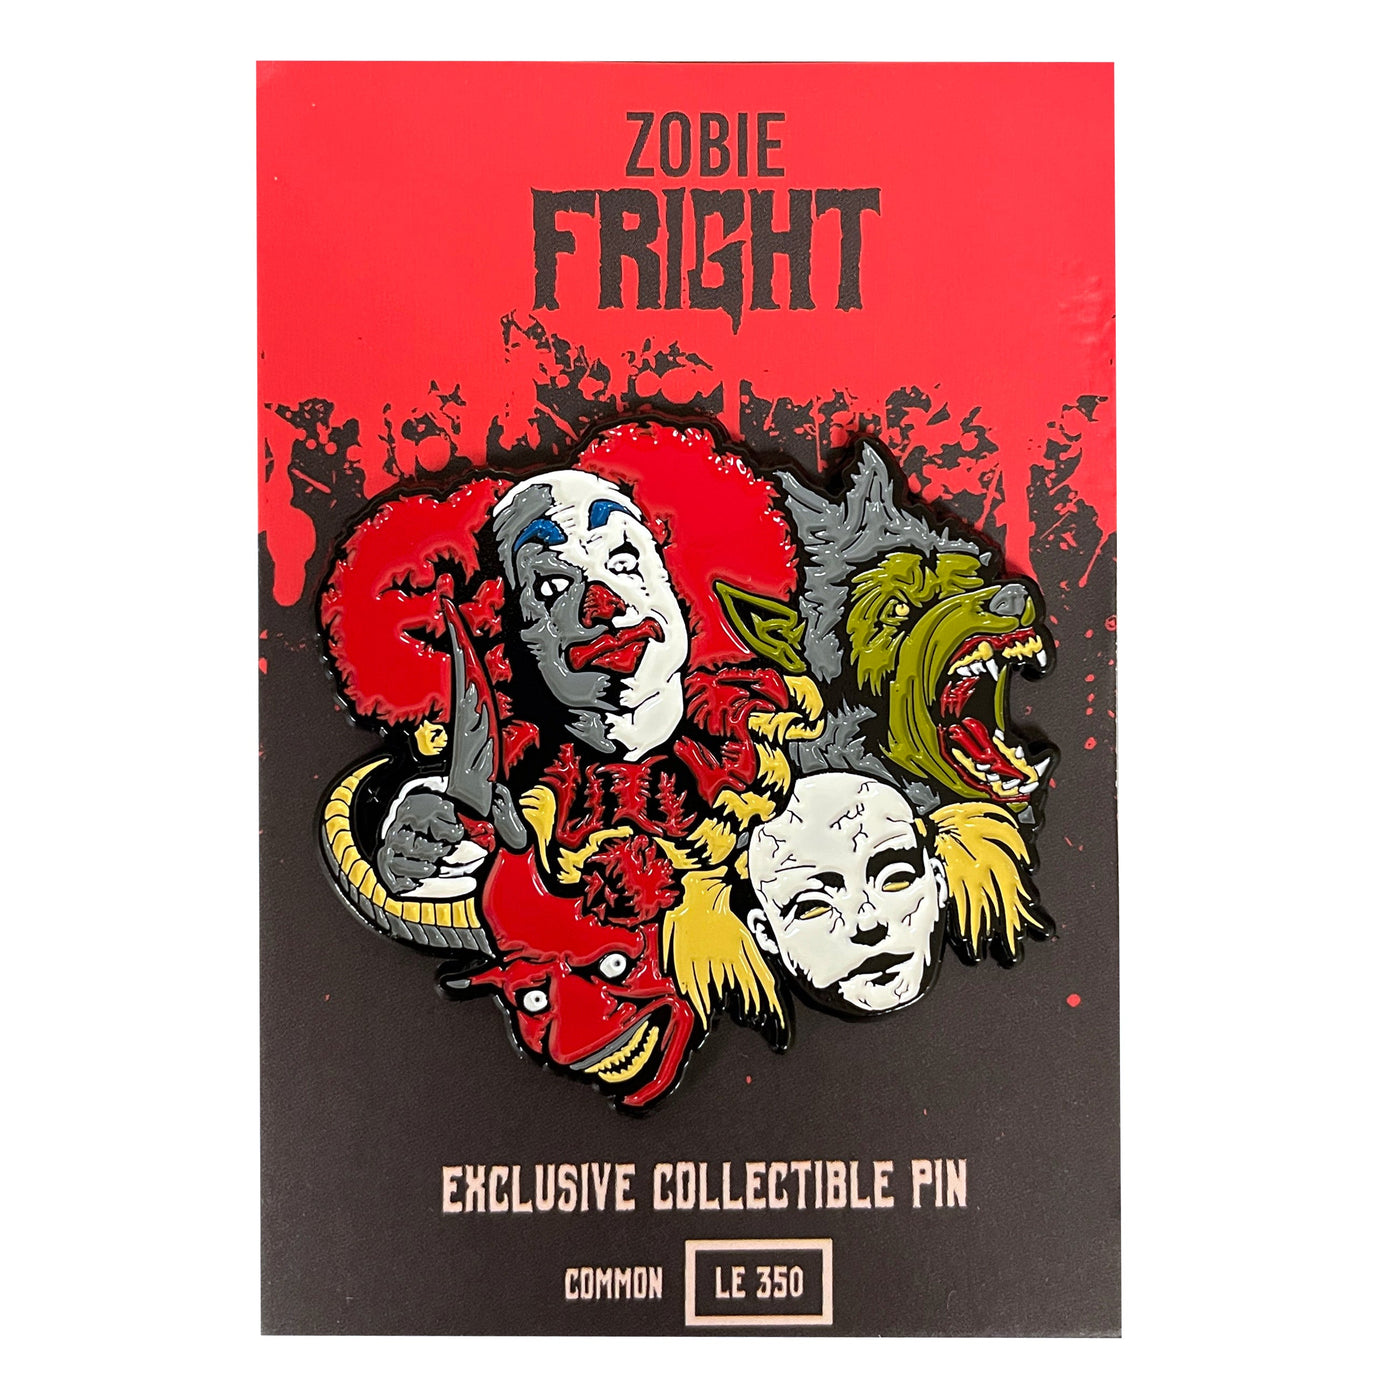 Zobie Fright Exclusive 2" Enamel Pin - Cabin in the Woods "Common"